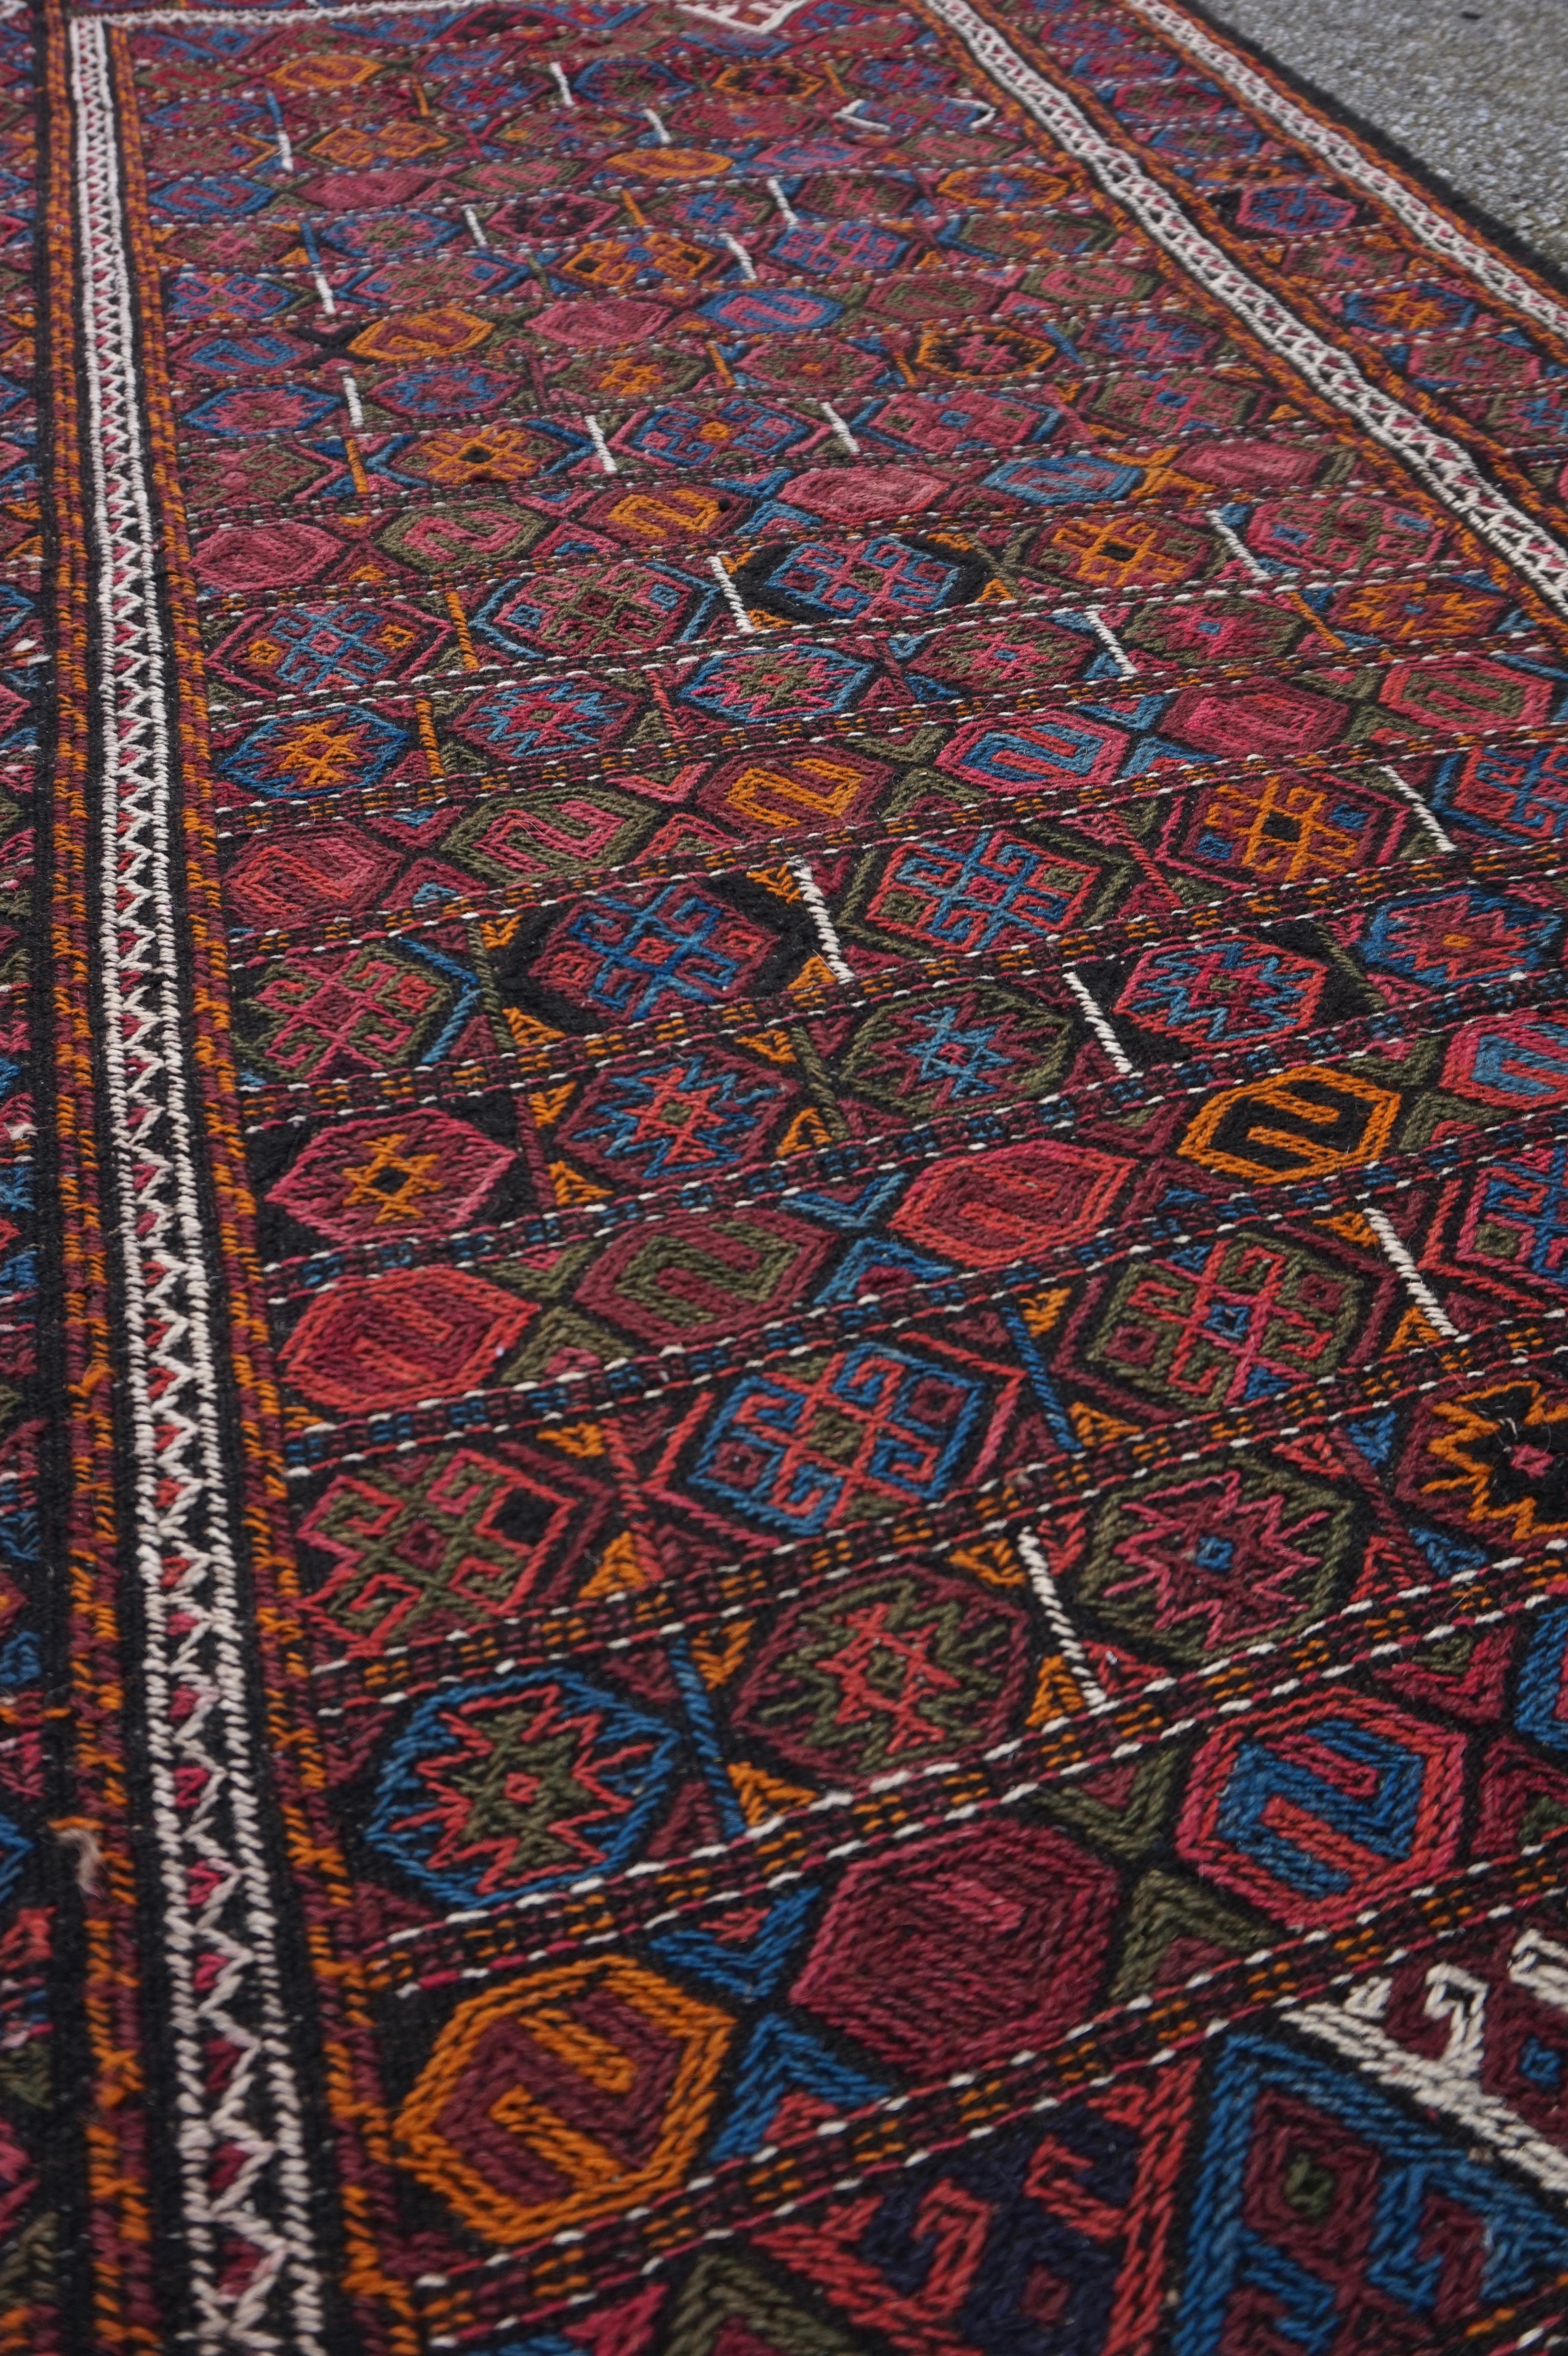 Wool Rare Old Stock Hand-Knotted Central Asian Nomadic Tribal Flat-Weave Kilim For Sale